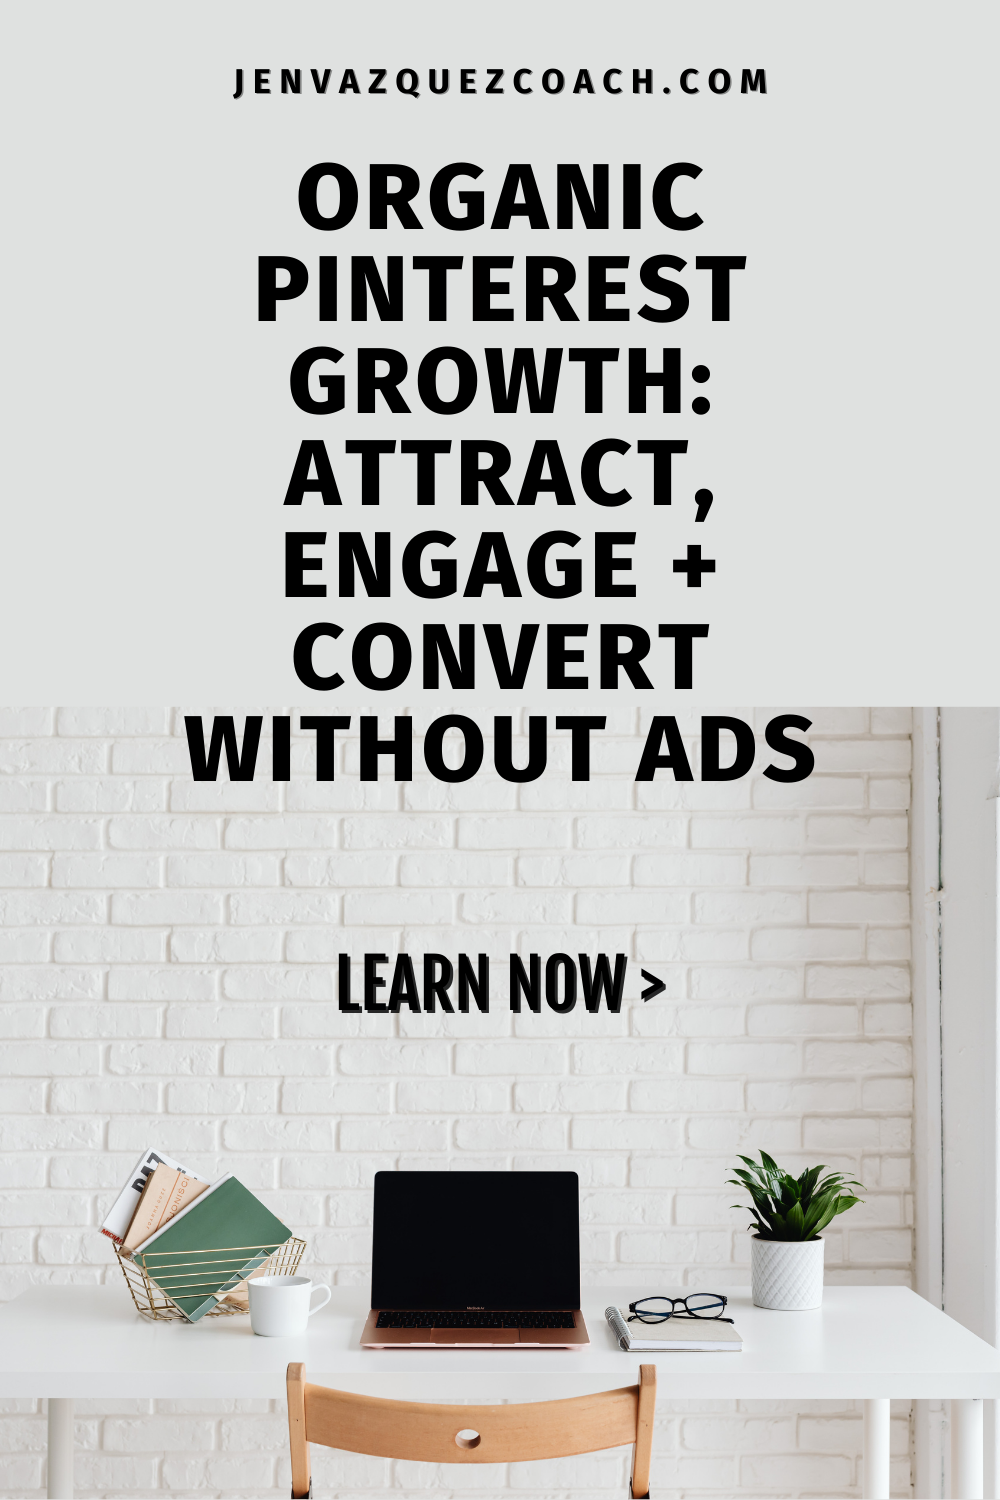 Organic Pinterest Growth Attract, Engage + Convert Without Ads by Jen Vazquez Media Pinterest Expert